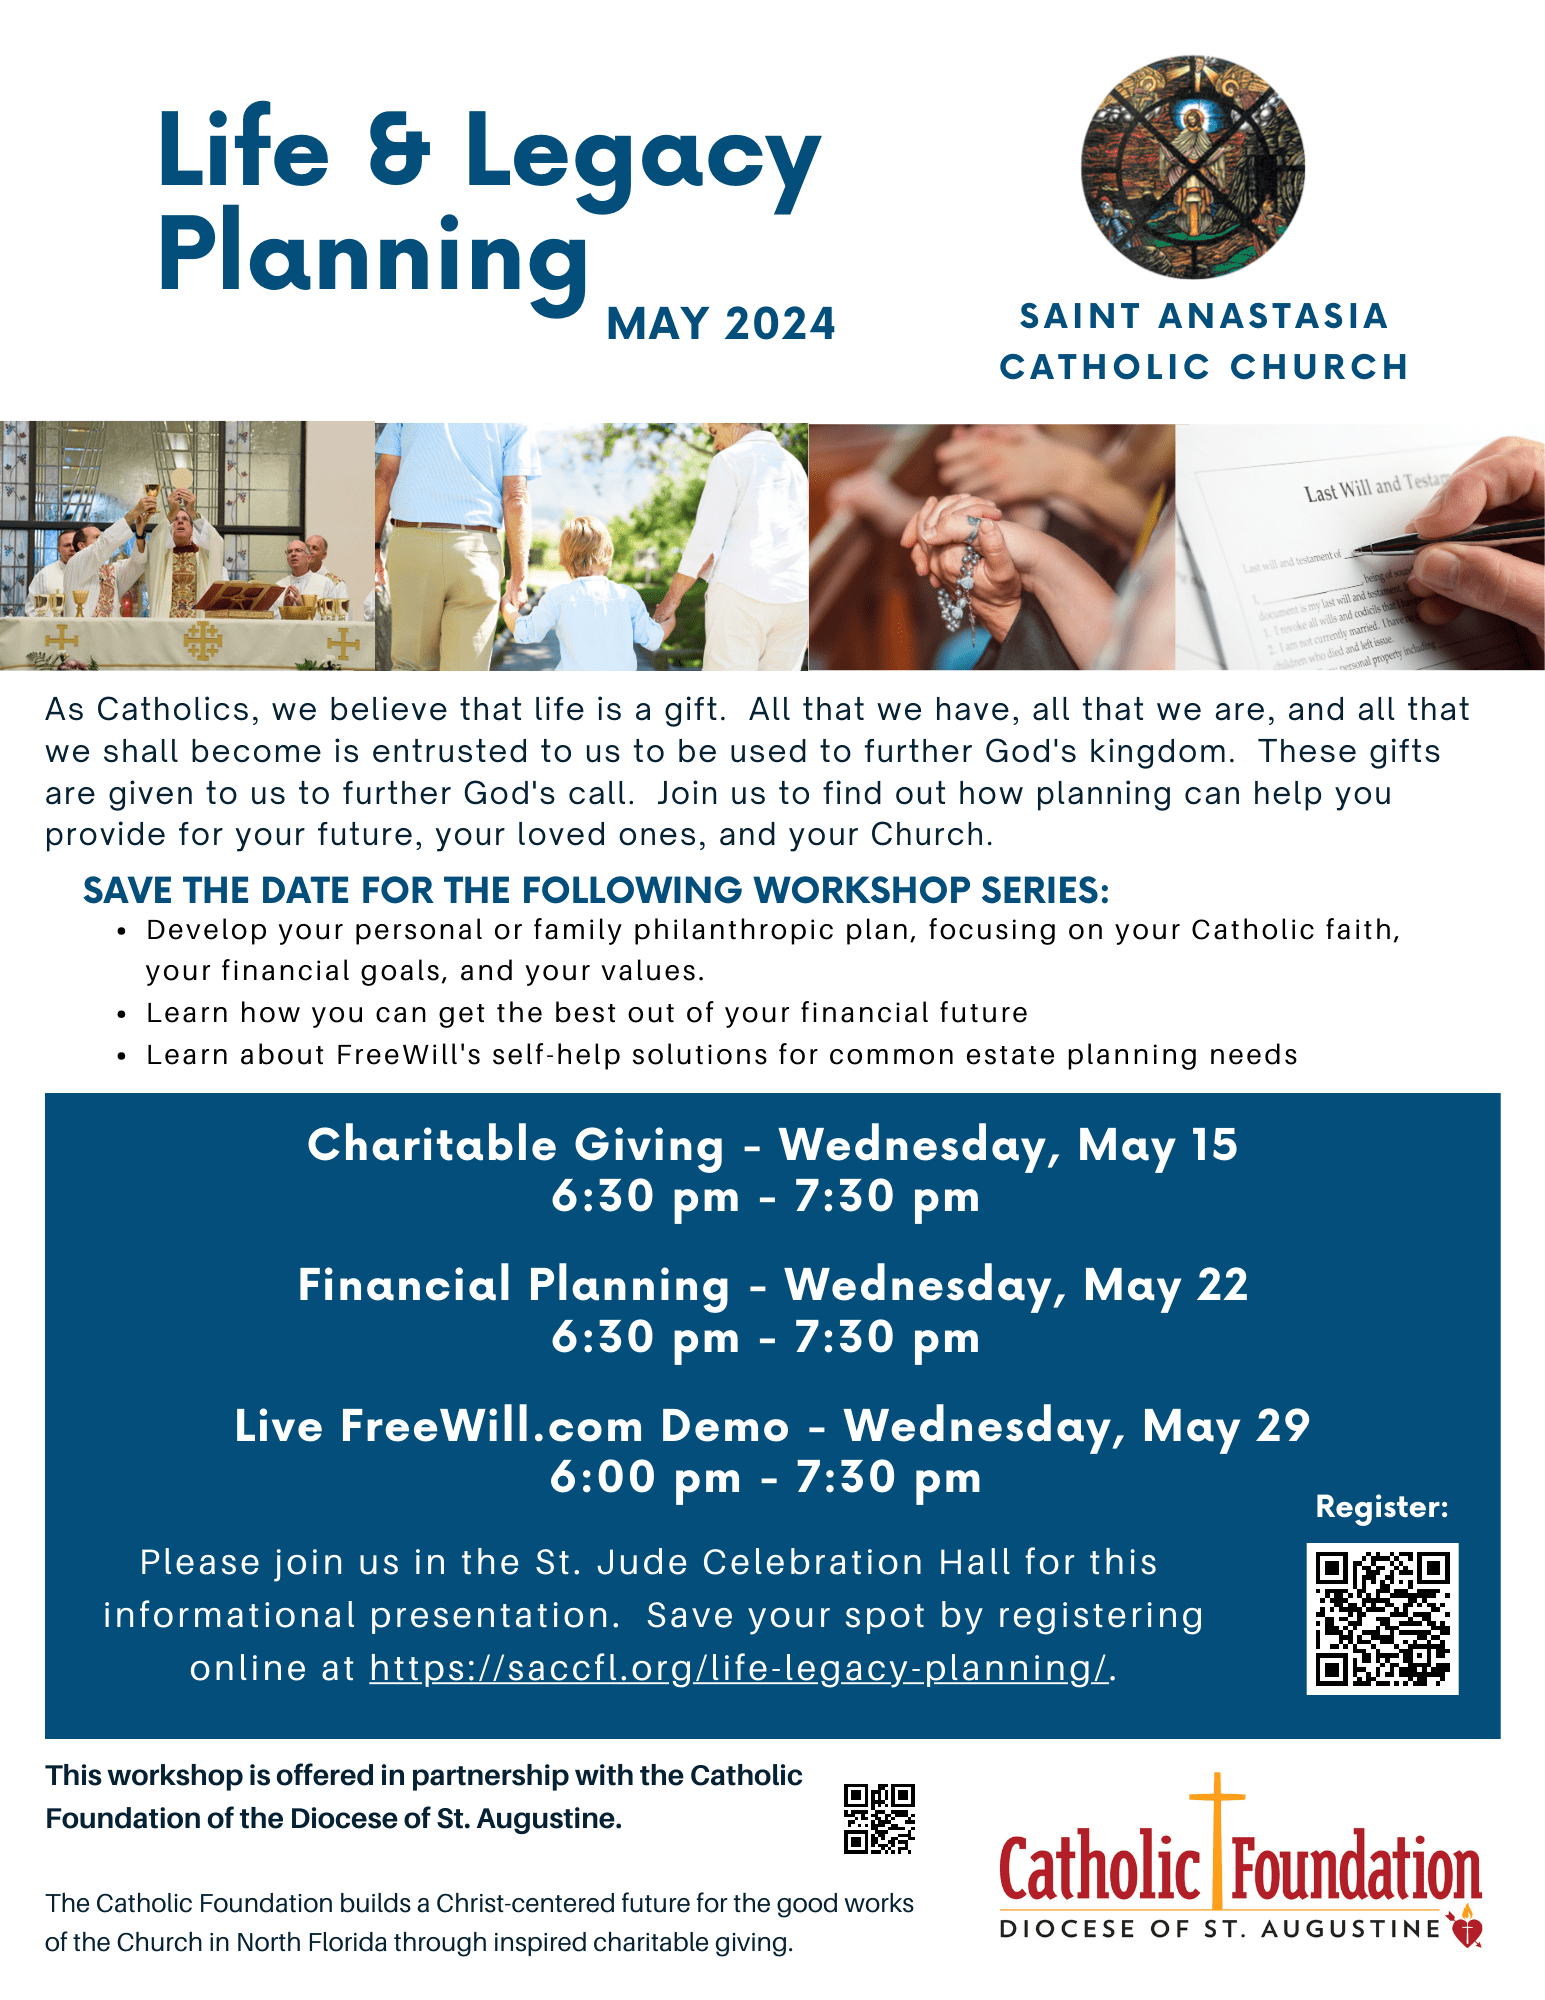 Life and Legacy Planning Workshop Series coming to St. Anastasia May 15, 22 & 29!